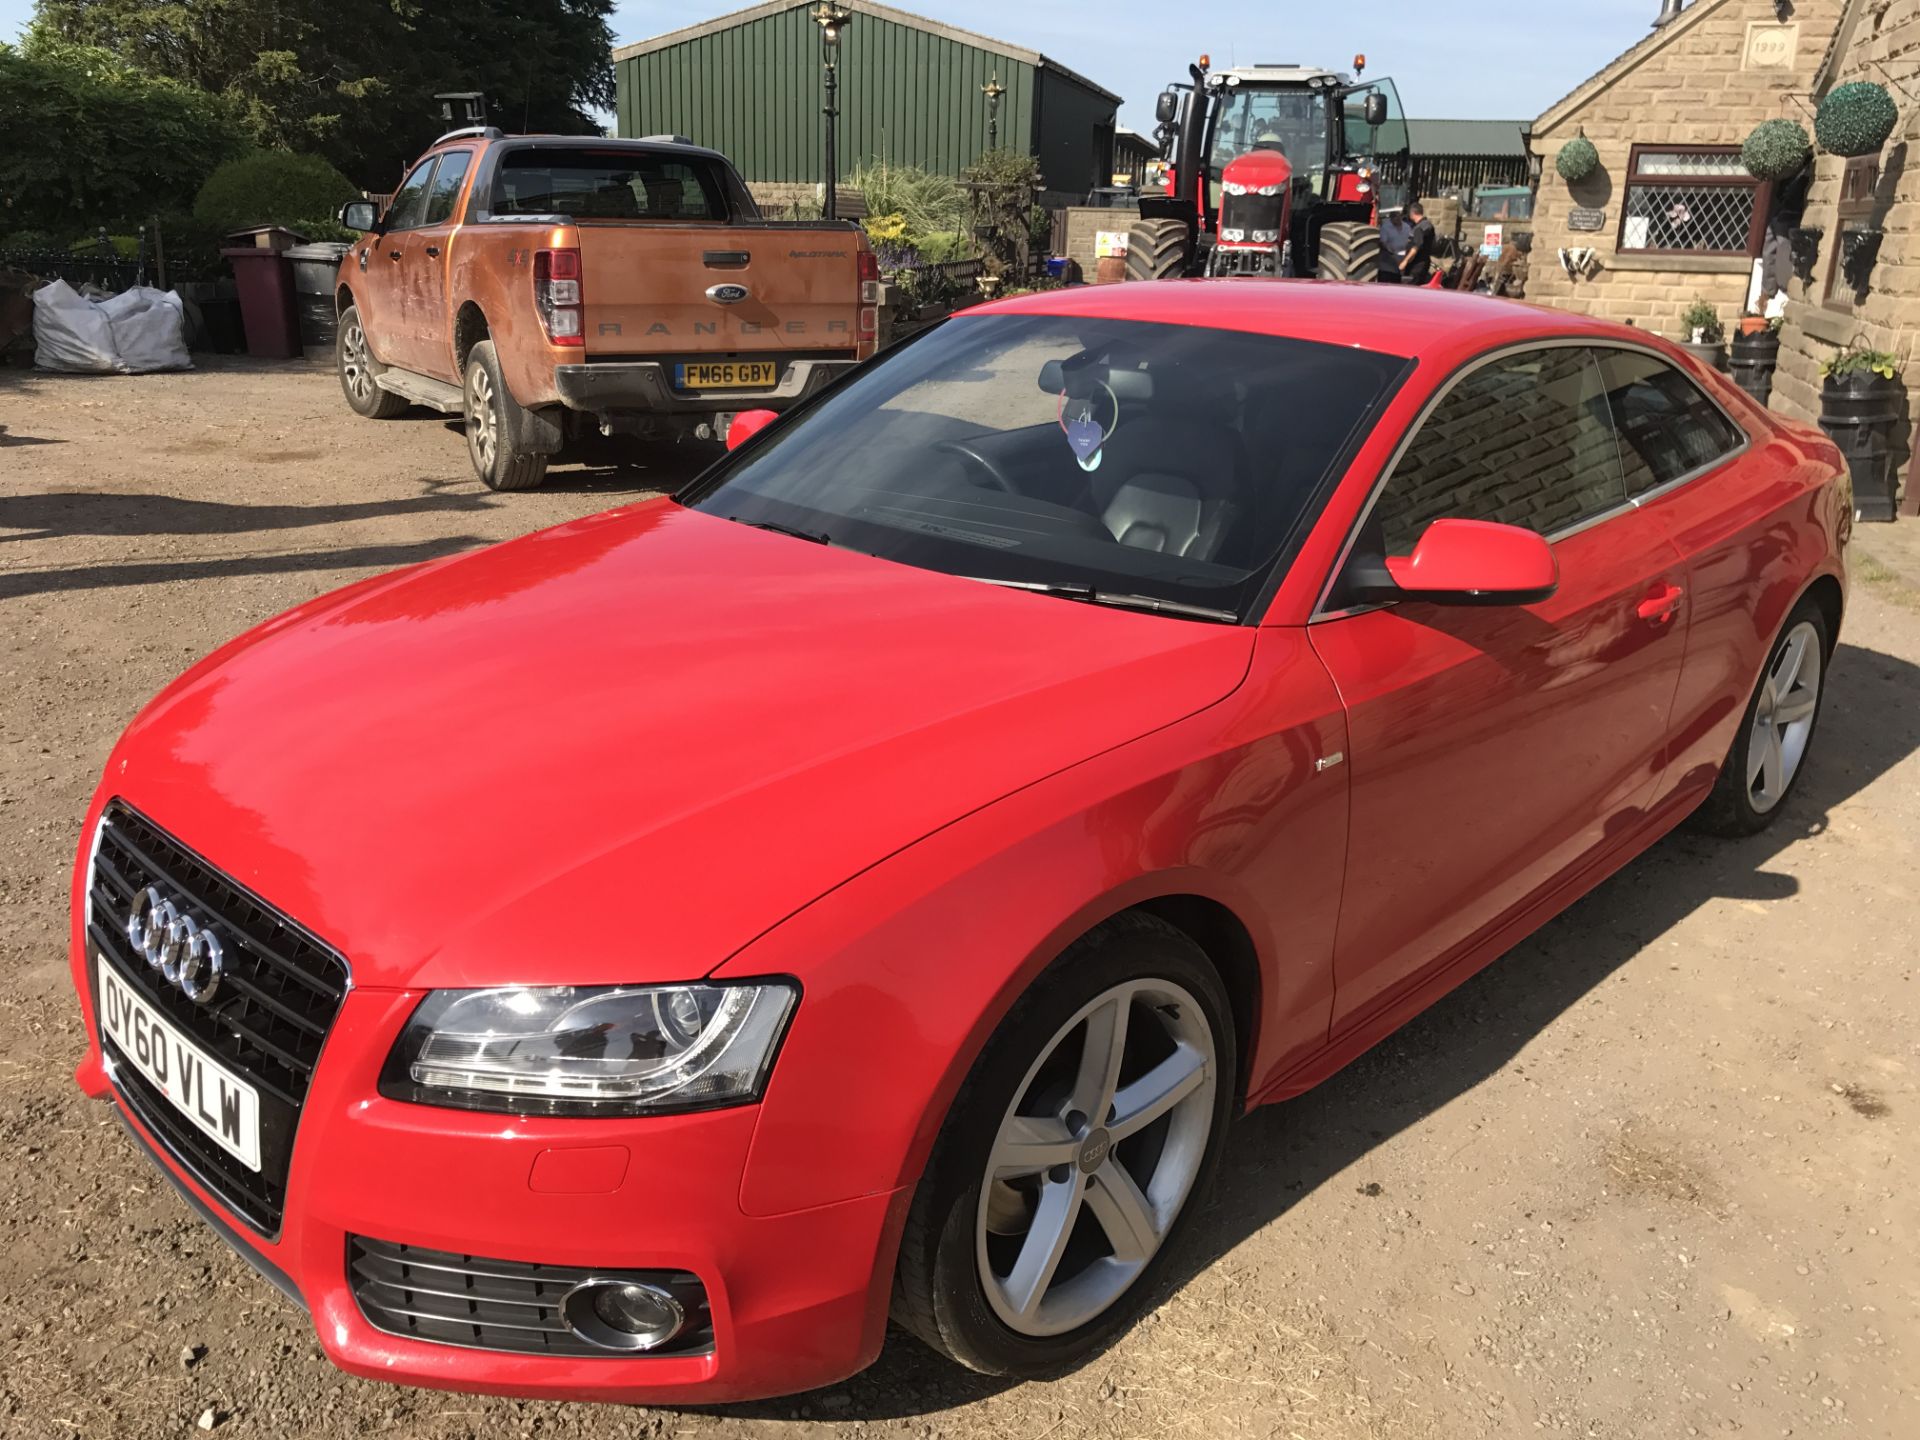 2010/60 REG AUDI A5 S LINE TDI QUATTRO SEMI-AUTOMATIC 3.0 LITRE, SHOWING 2 FORMER KEEPERS *NO VAT* - Image 4 of 17